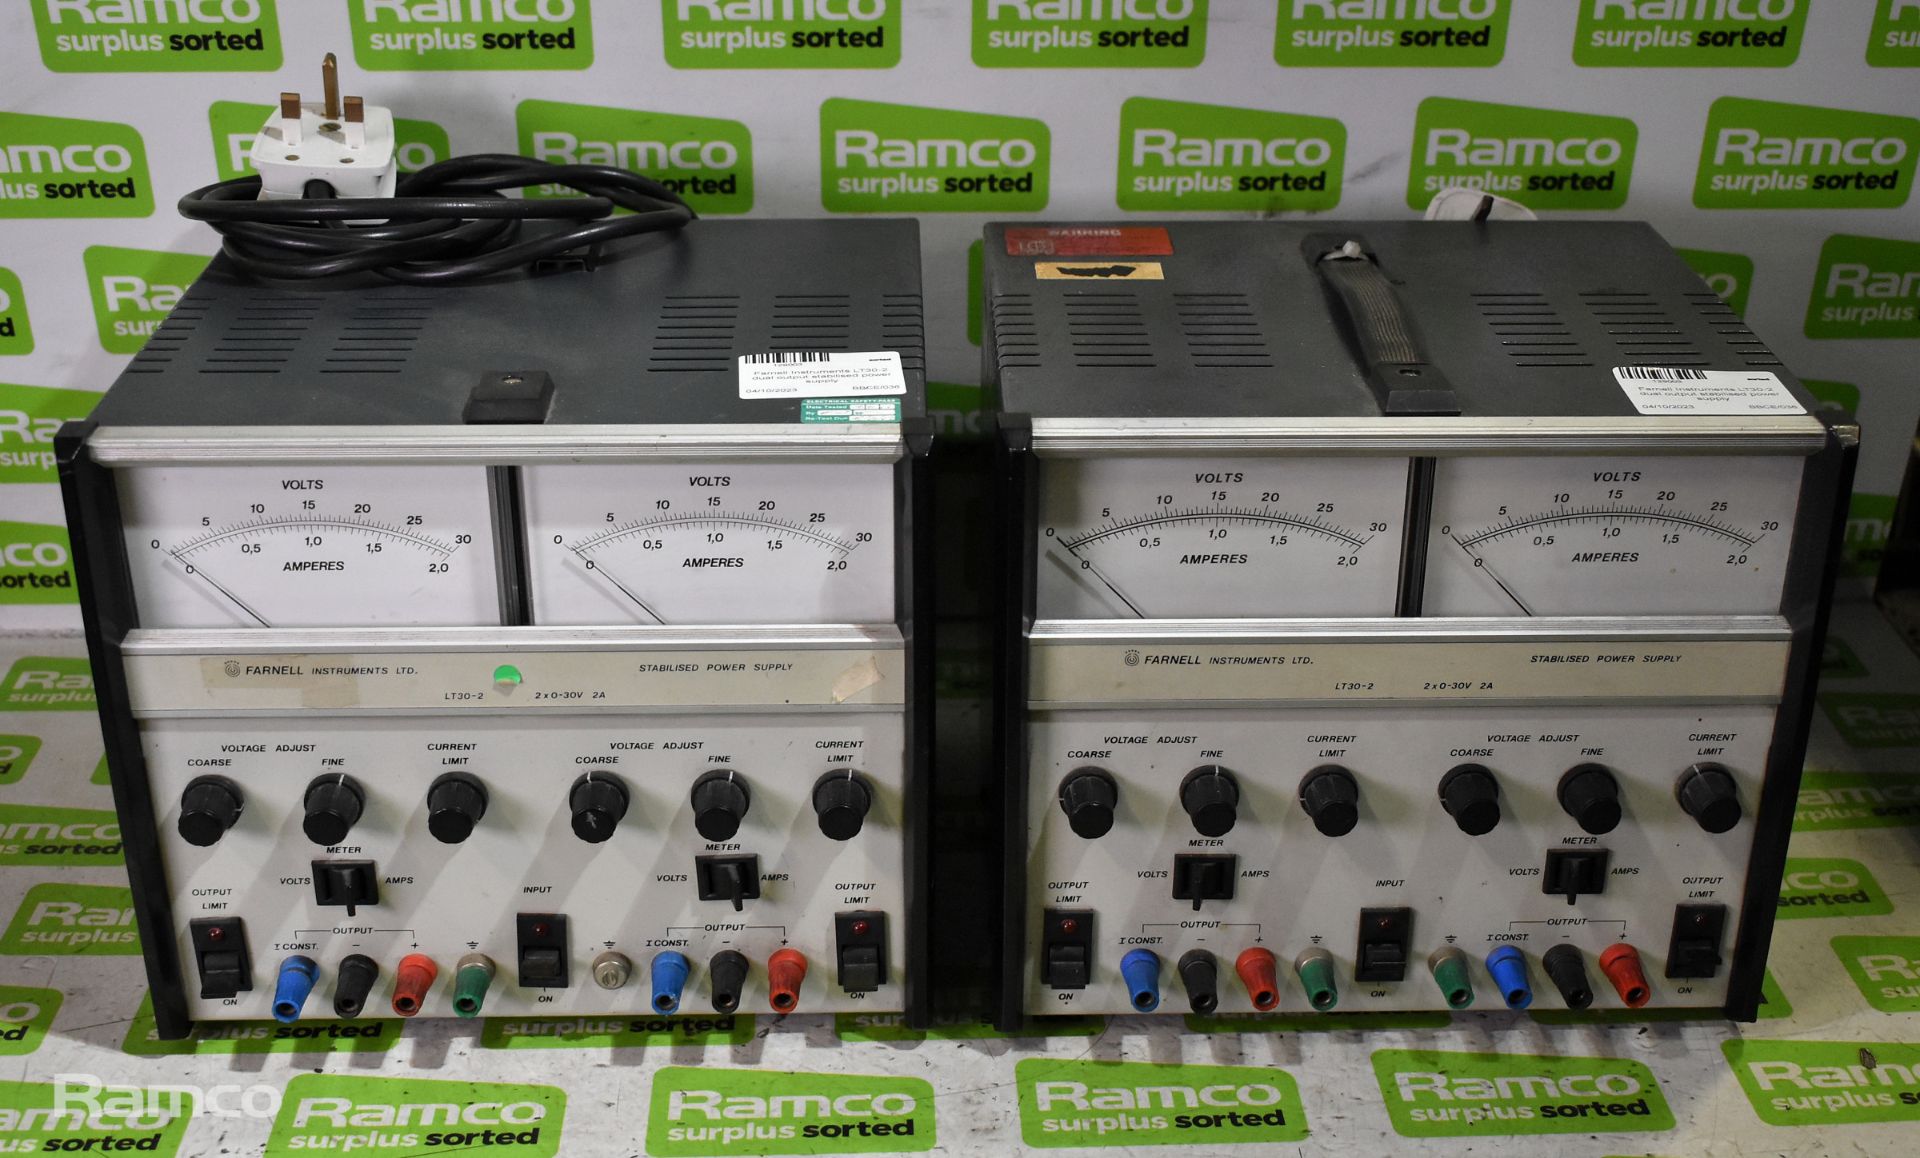 2x Farnell Instruments LT30-2 dual output stabilised power supplies